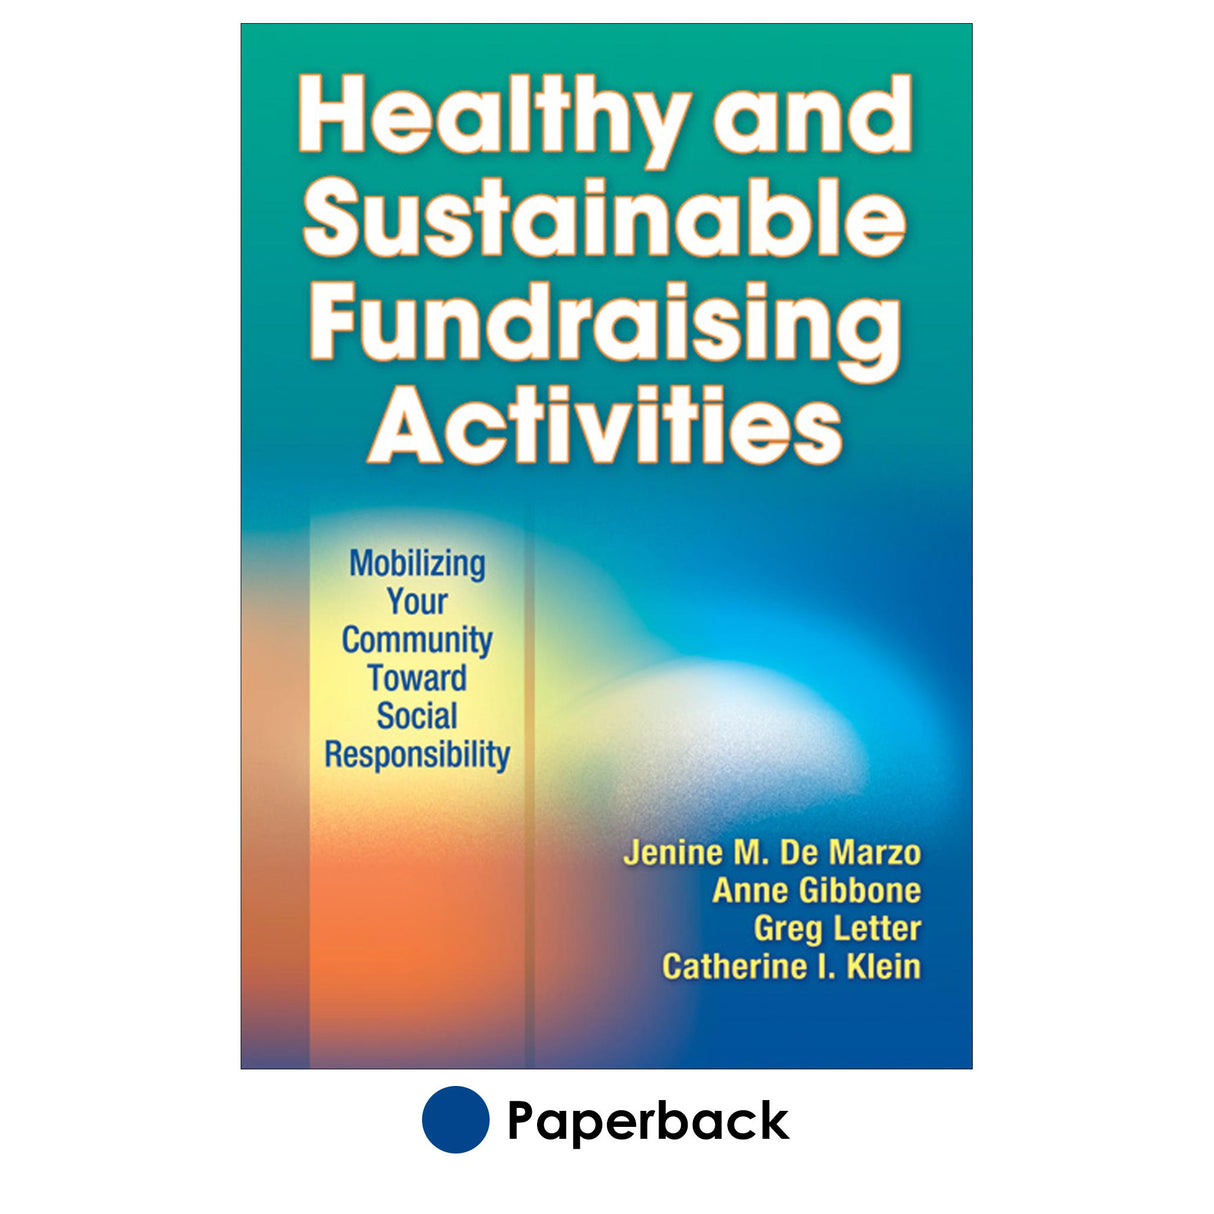 Healthy and Sustainable Fundraising Activities